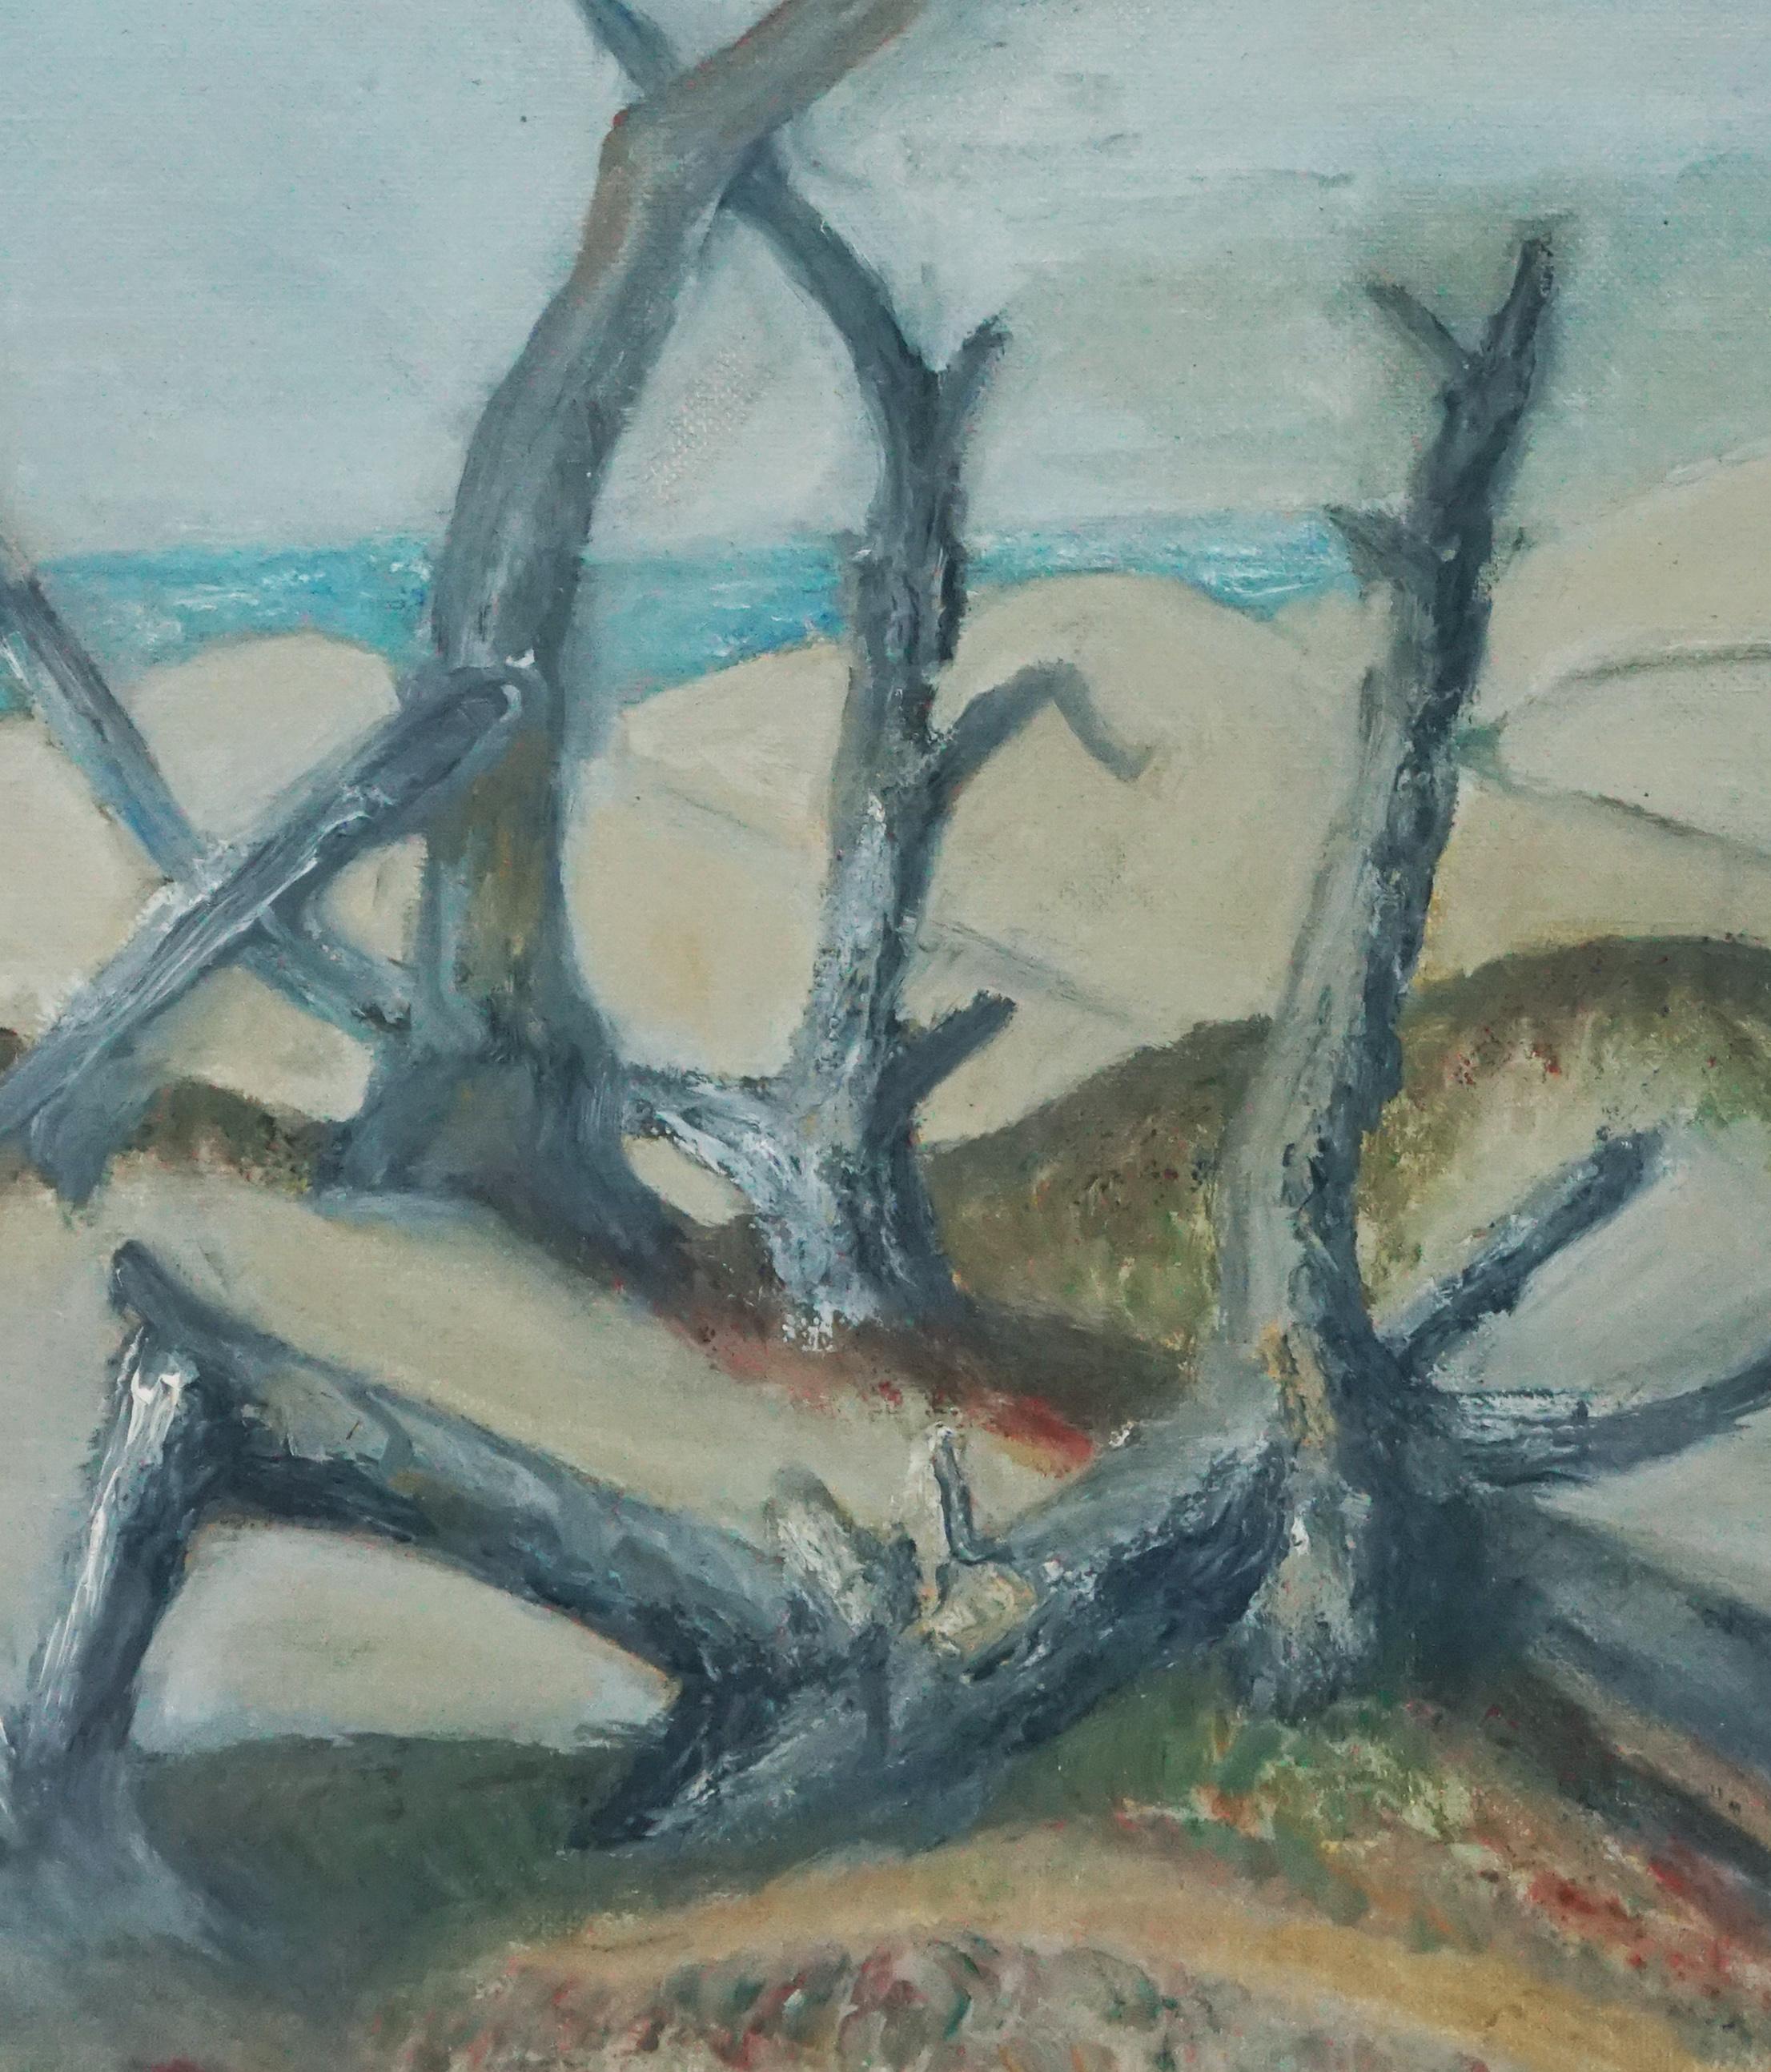 Driftwood on the Beach, Mid Century Coastal Landscape  - Painting by Genevieve Rogers